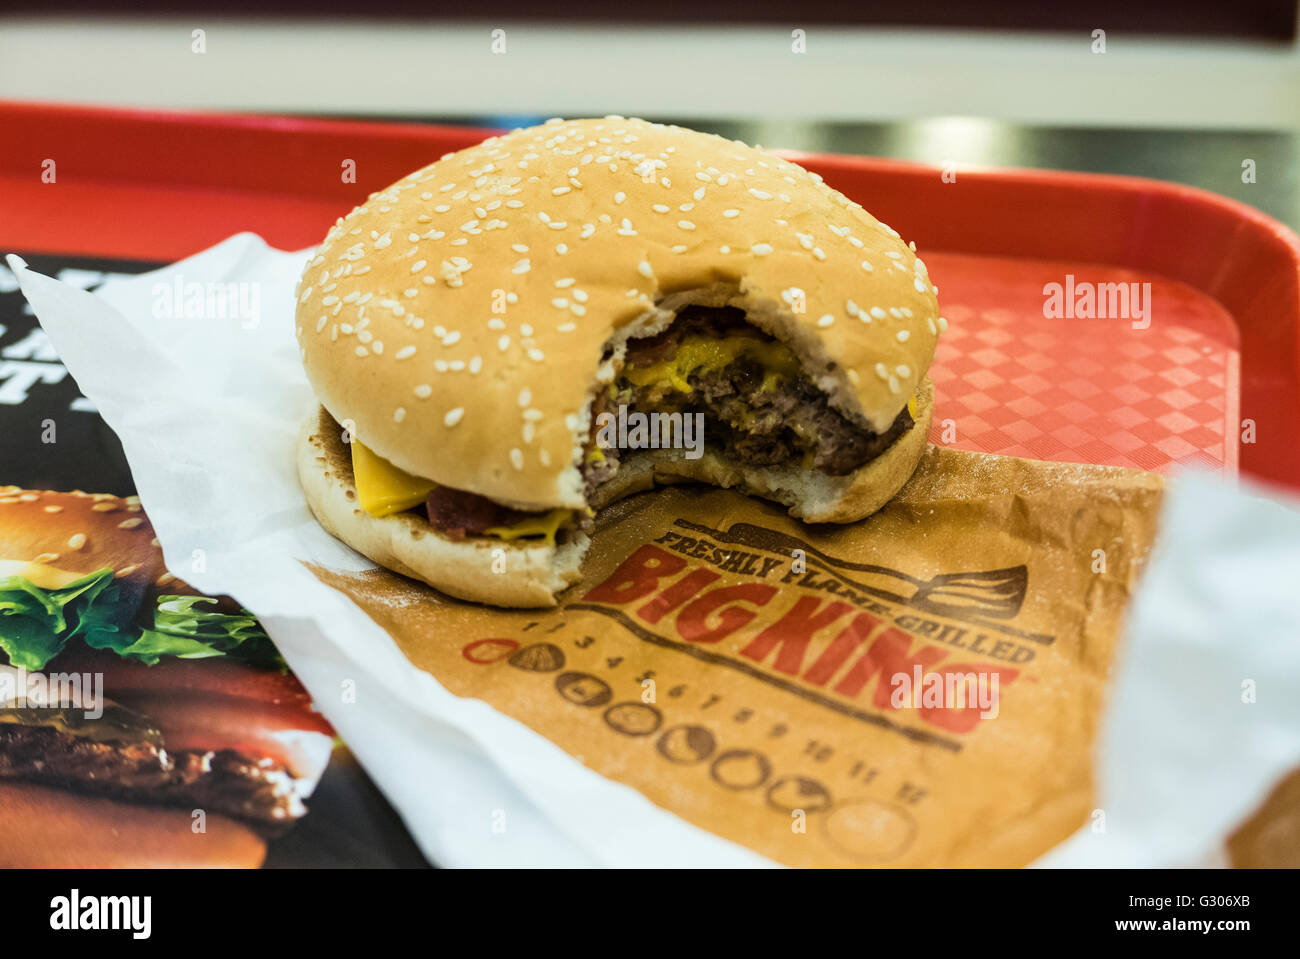 Hamburger, with a bite taken out of it, on a tray in a Burger King fast-food restaurant Stock Photo